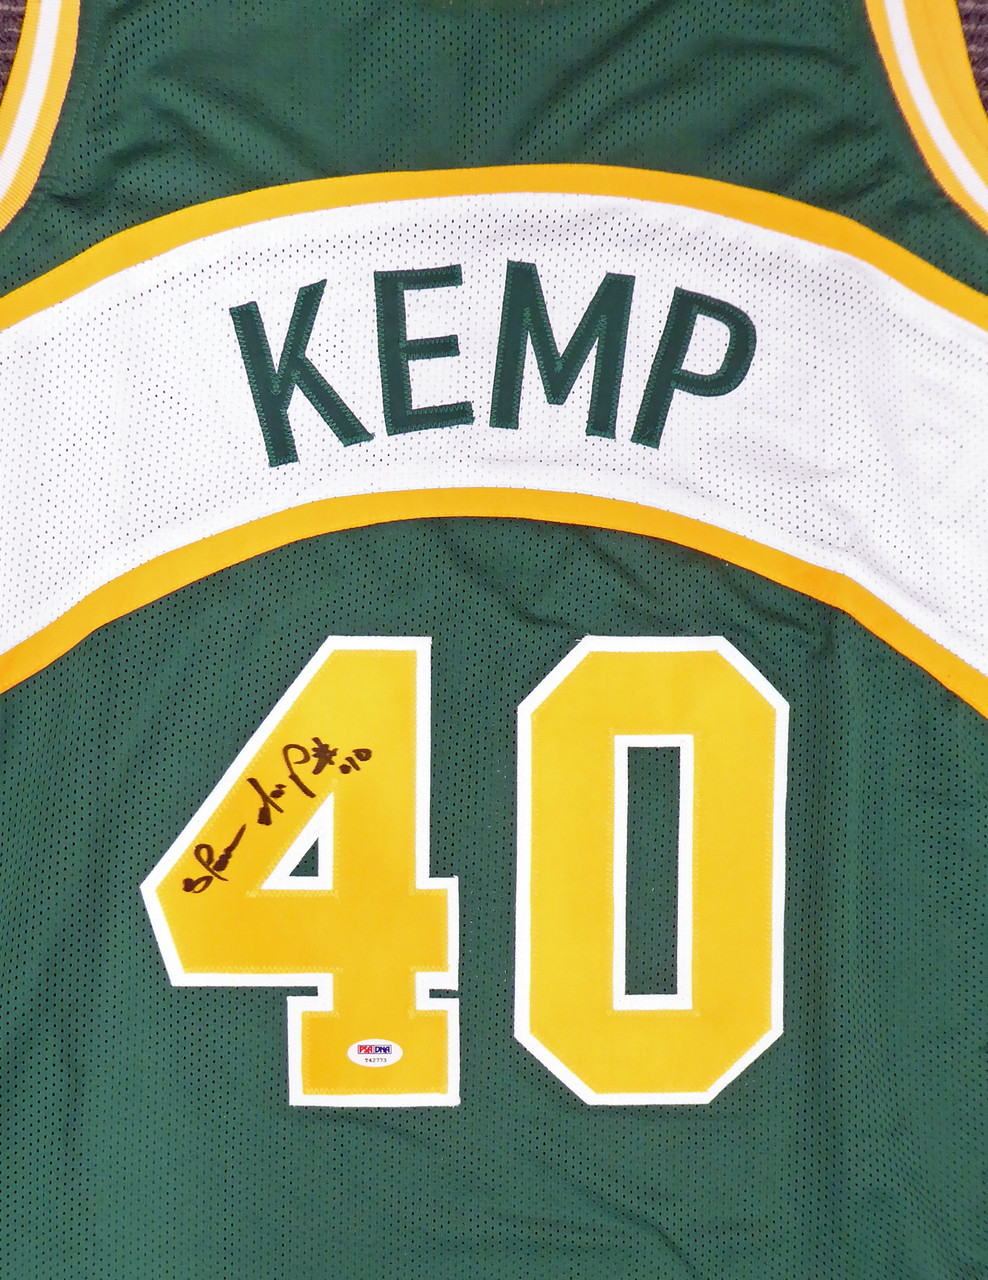 Shawn Kemp Framed Signed Jersey Beckett Autographed Signed Seattle  Supersonics